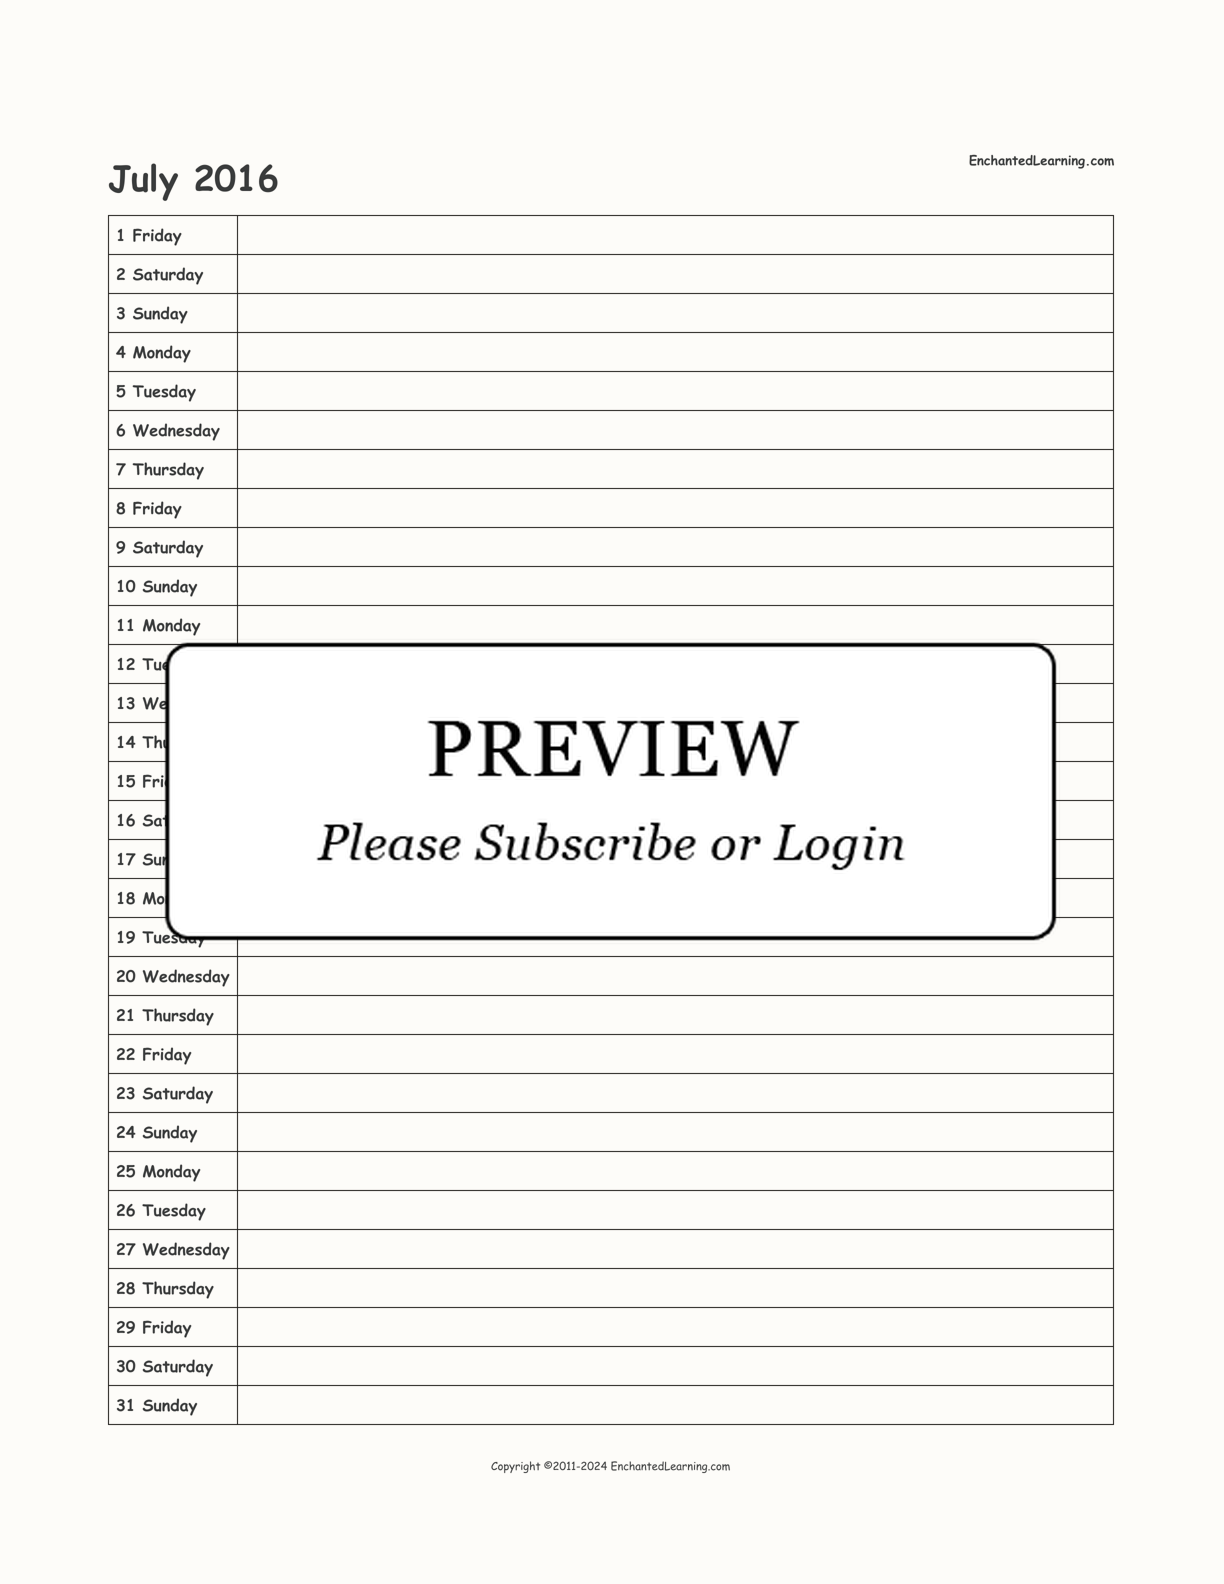 2016 Scheduling Calendar interactive printout page 7